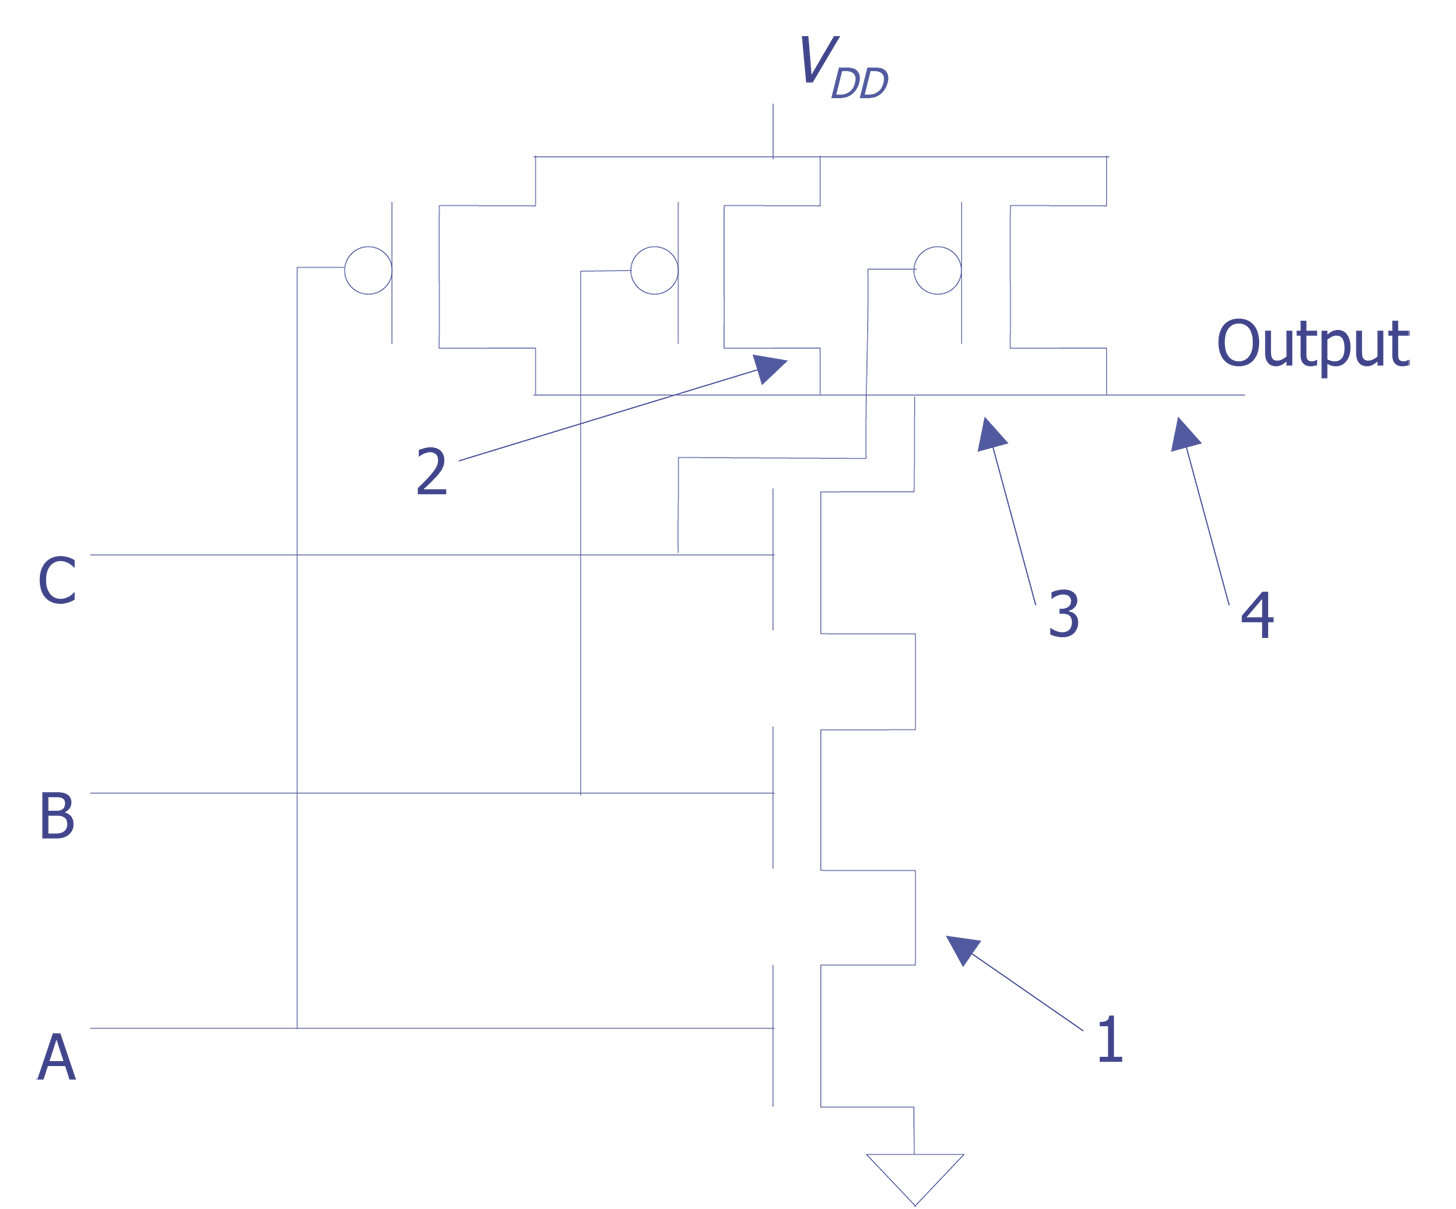 3-input CMOS NAND gate with possible open conductors at points 1, 2, 3, and 4.